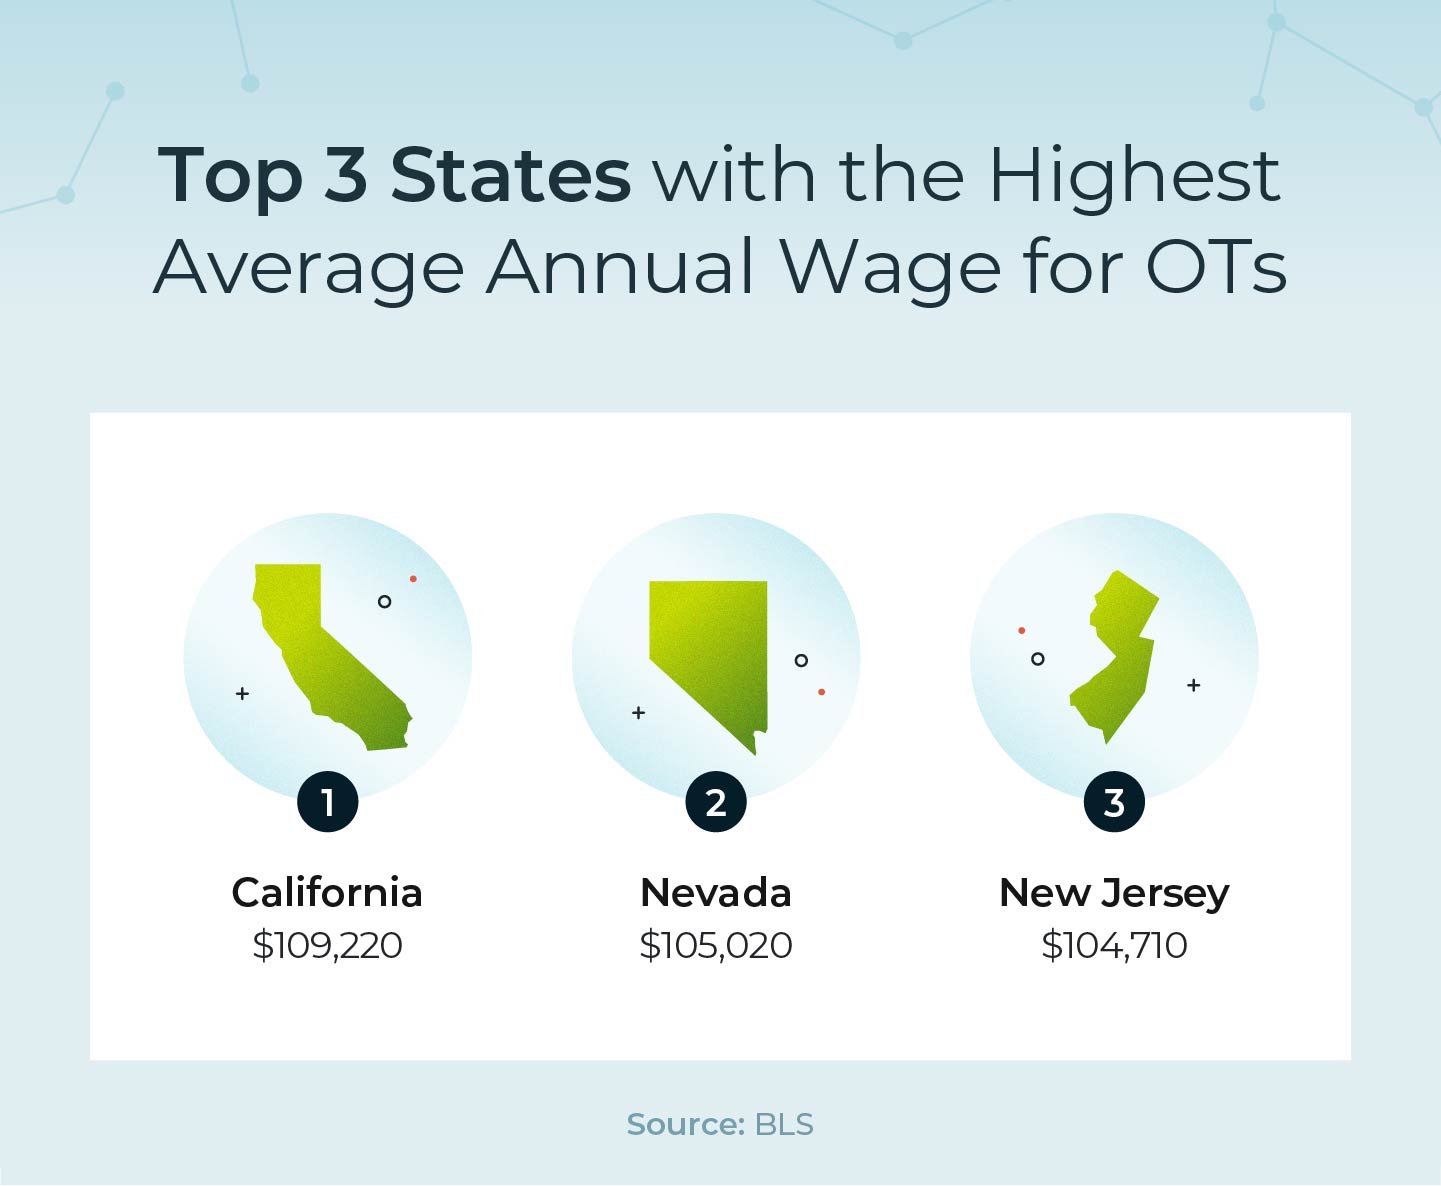 Highest-paying states for occupational therapists.